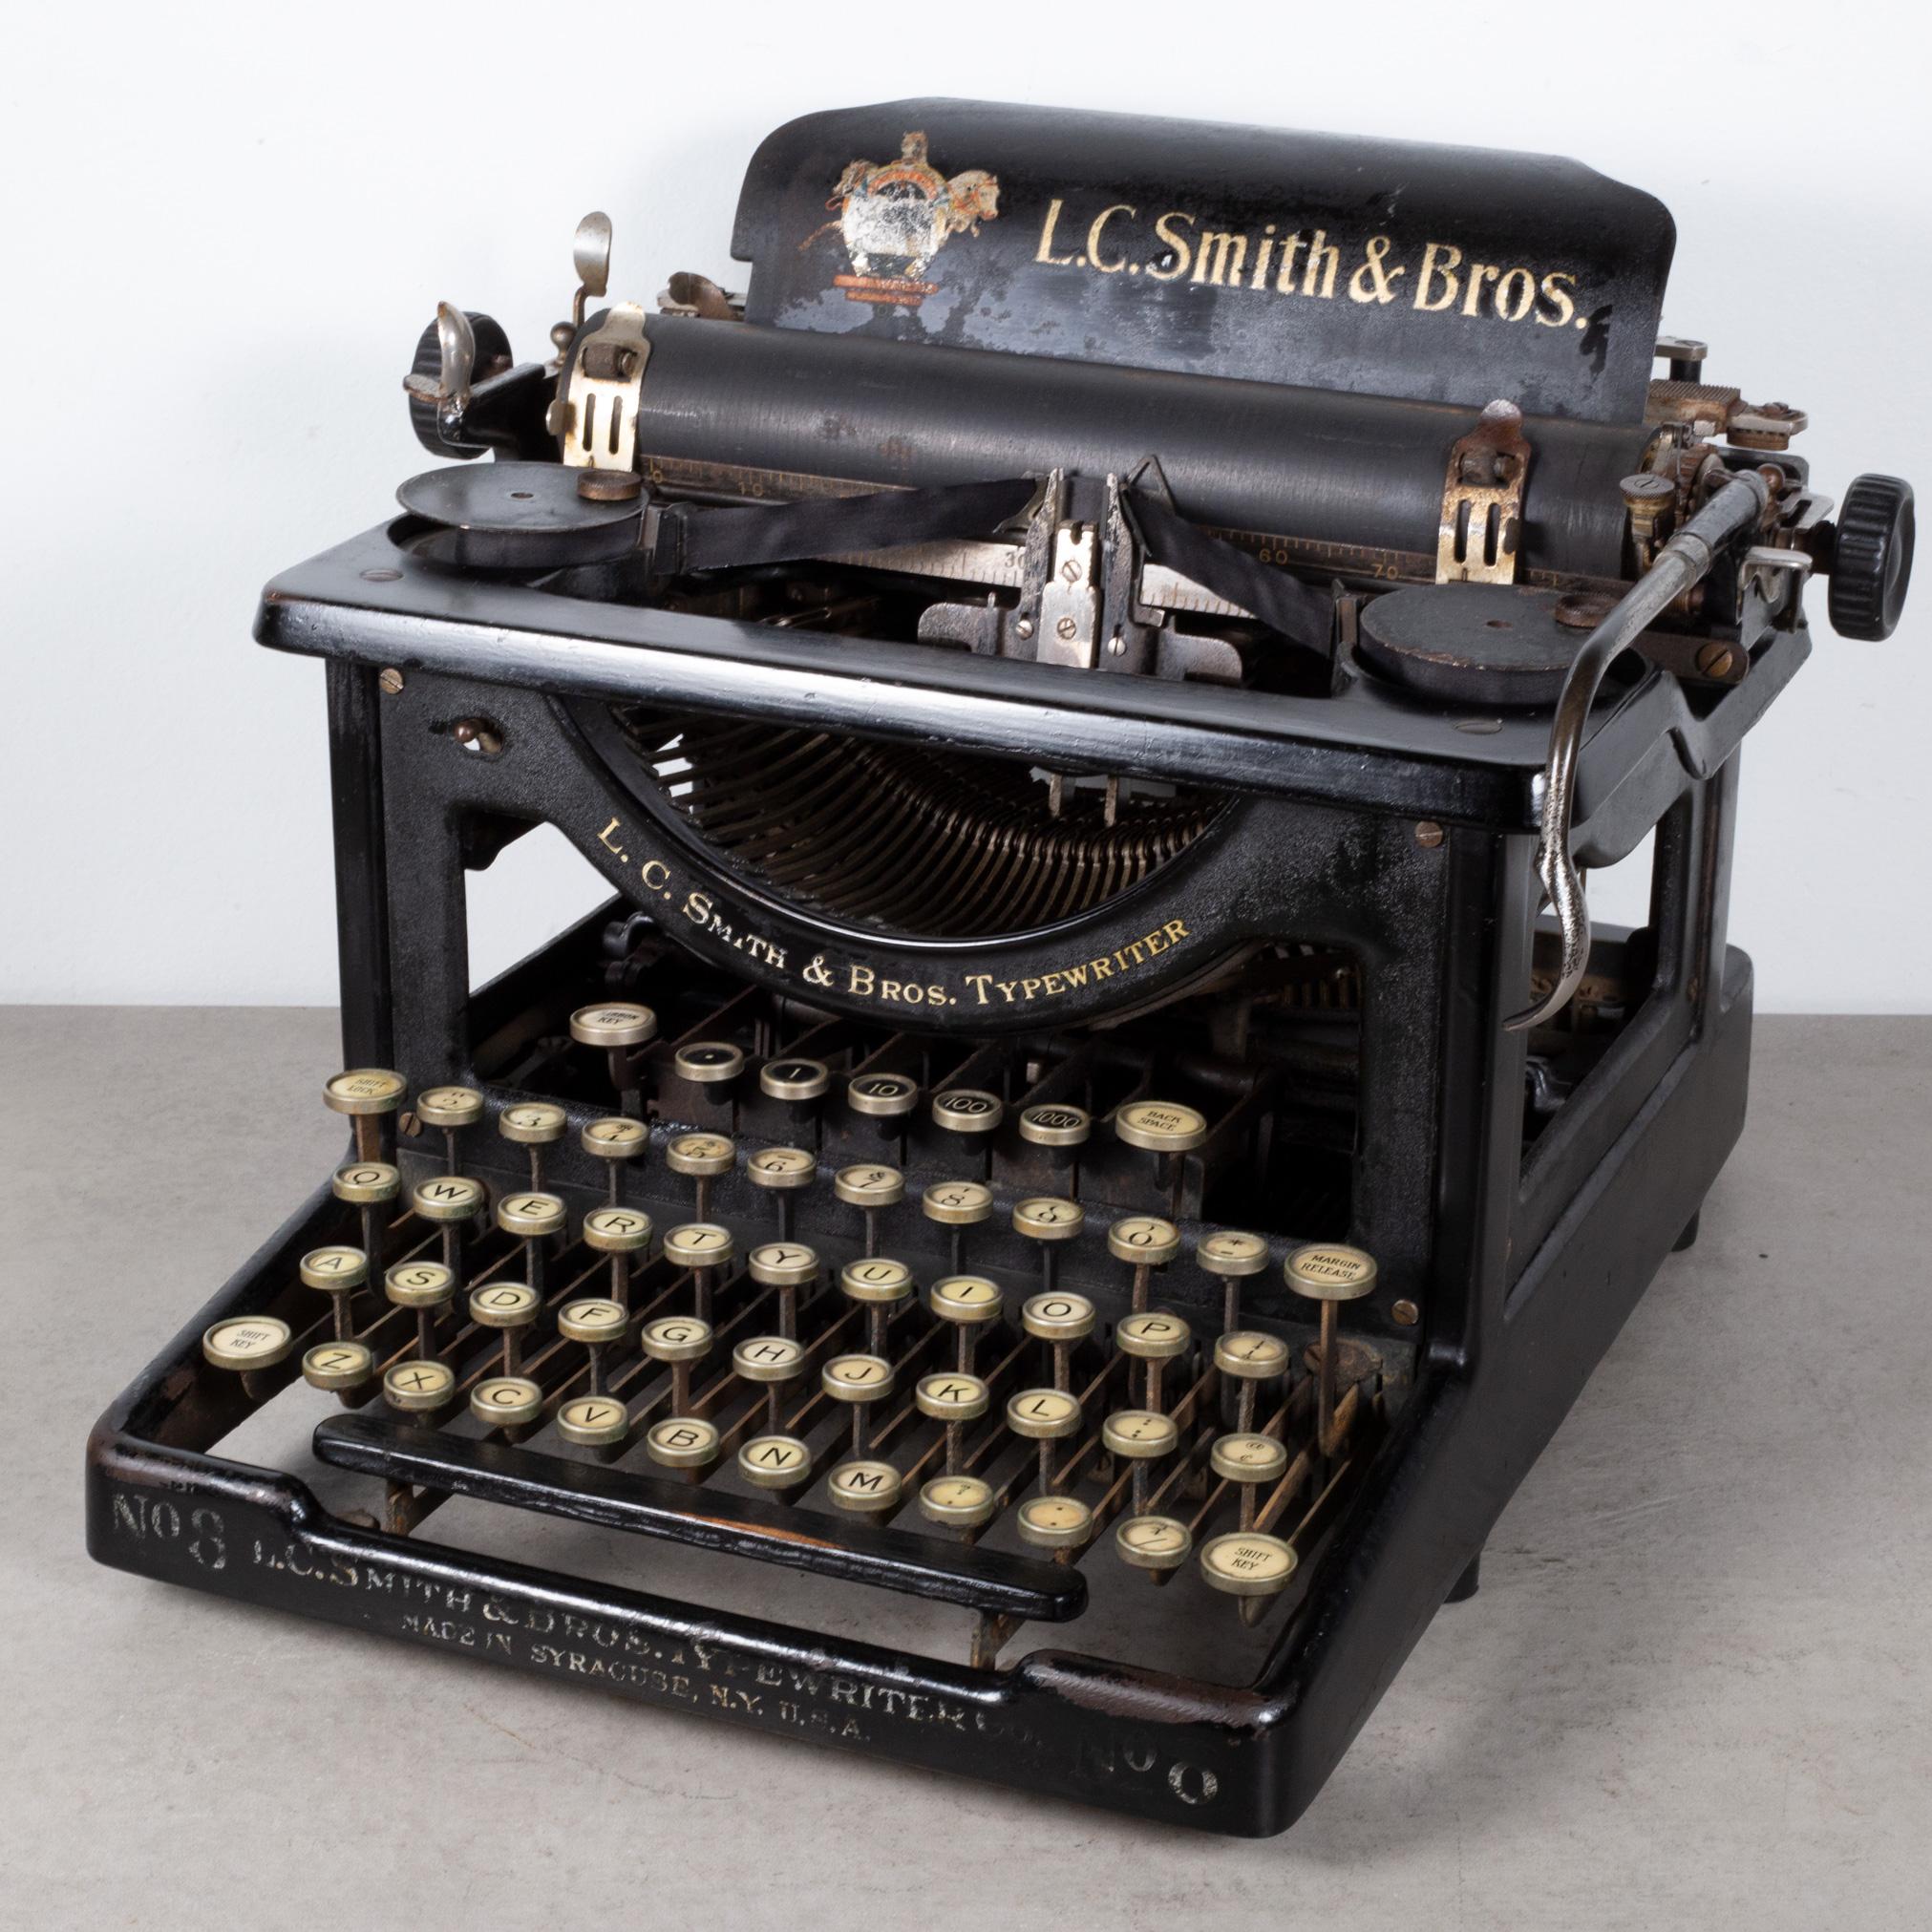 ABOUT

An original LC Smith & Bros. Typewriter No.8 with a 14 inch carriage and an open-frame design. The keys are nickel with white face and black numbers. Four rows of keys with a top row of decimals. The typewriter functions properly and works